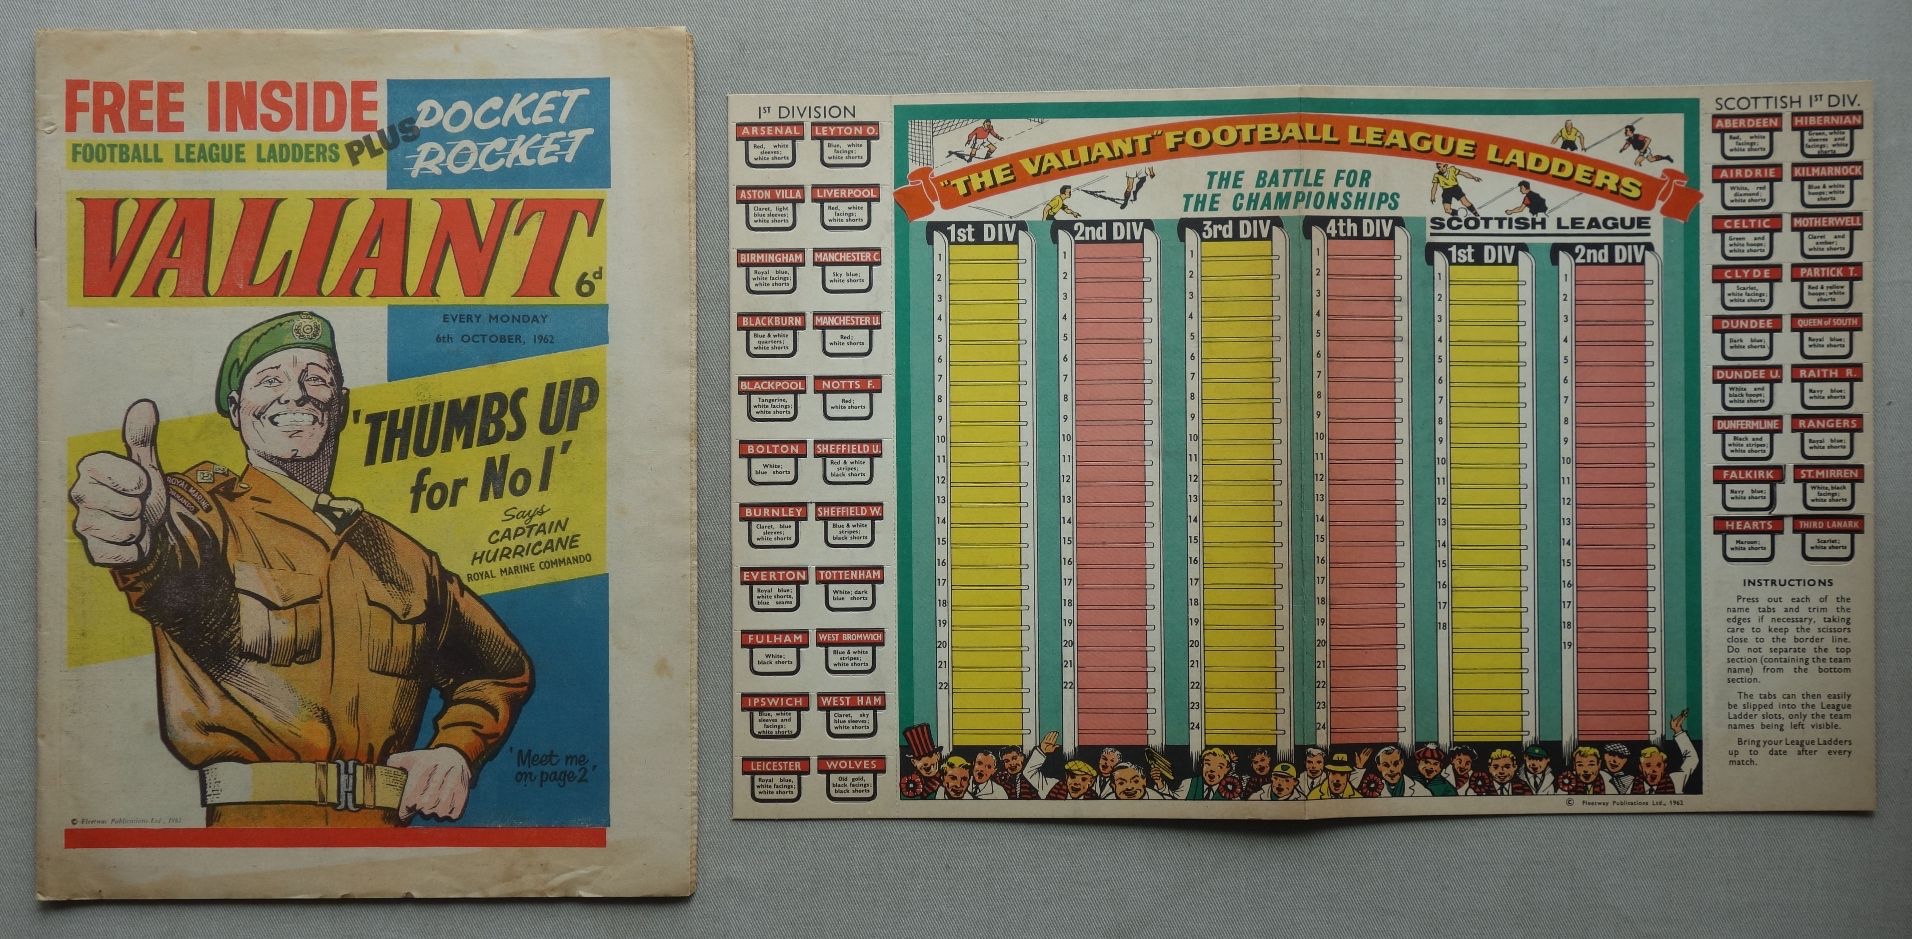 Valiant No. #1, cover dated 6th October 1962, with free gift -Football League Ladders